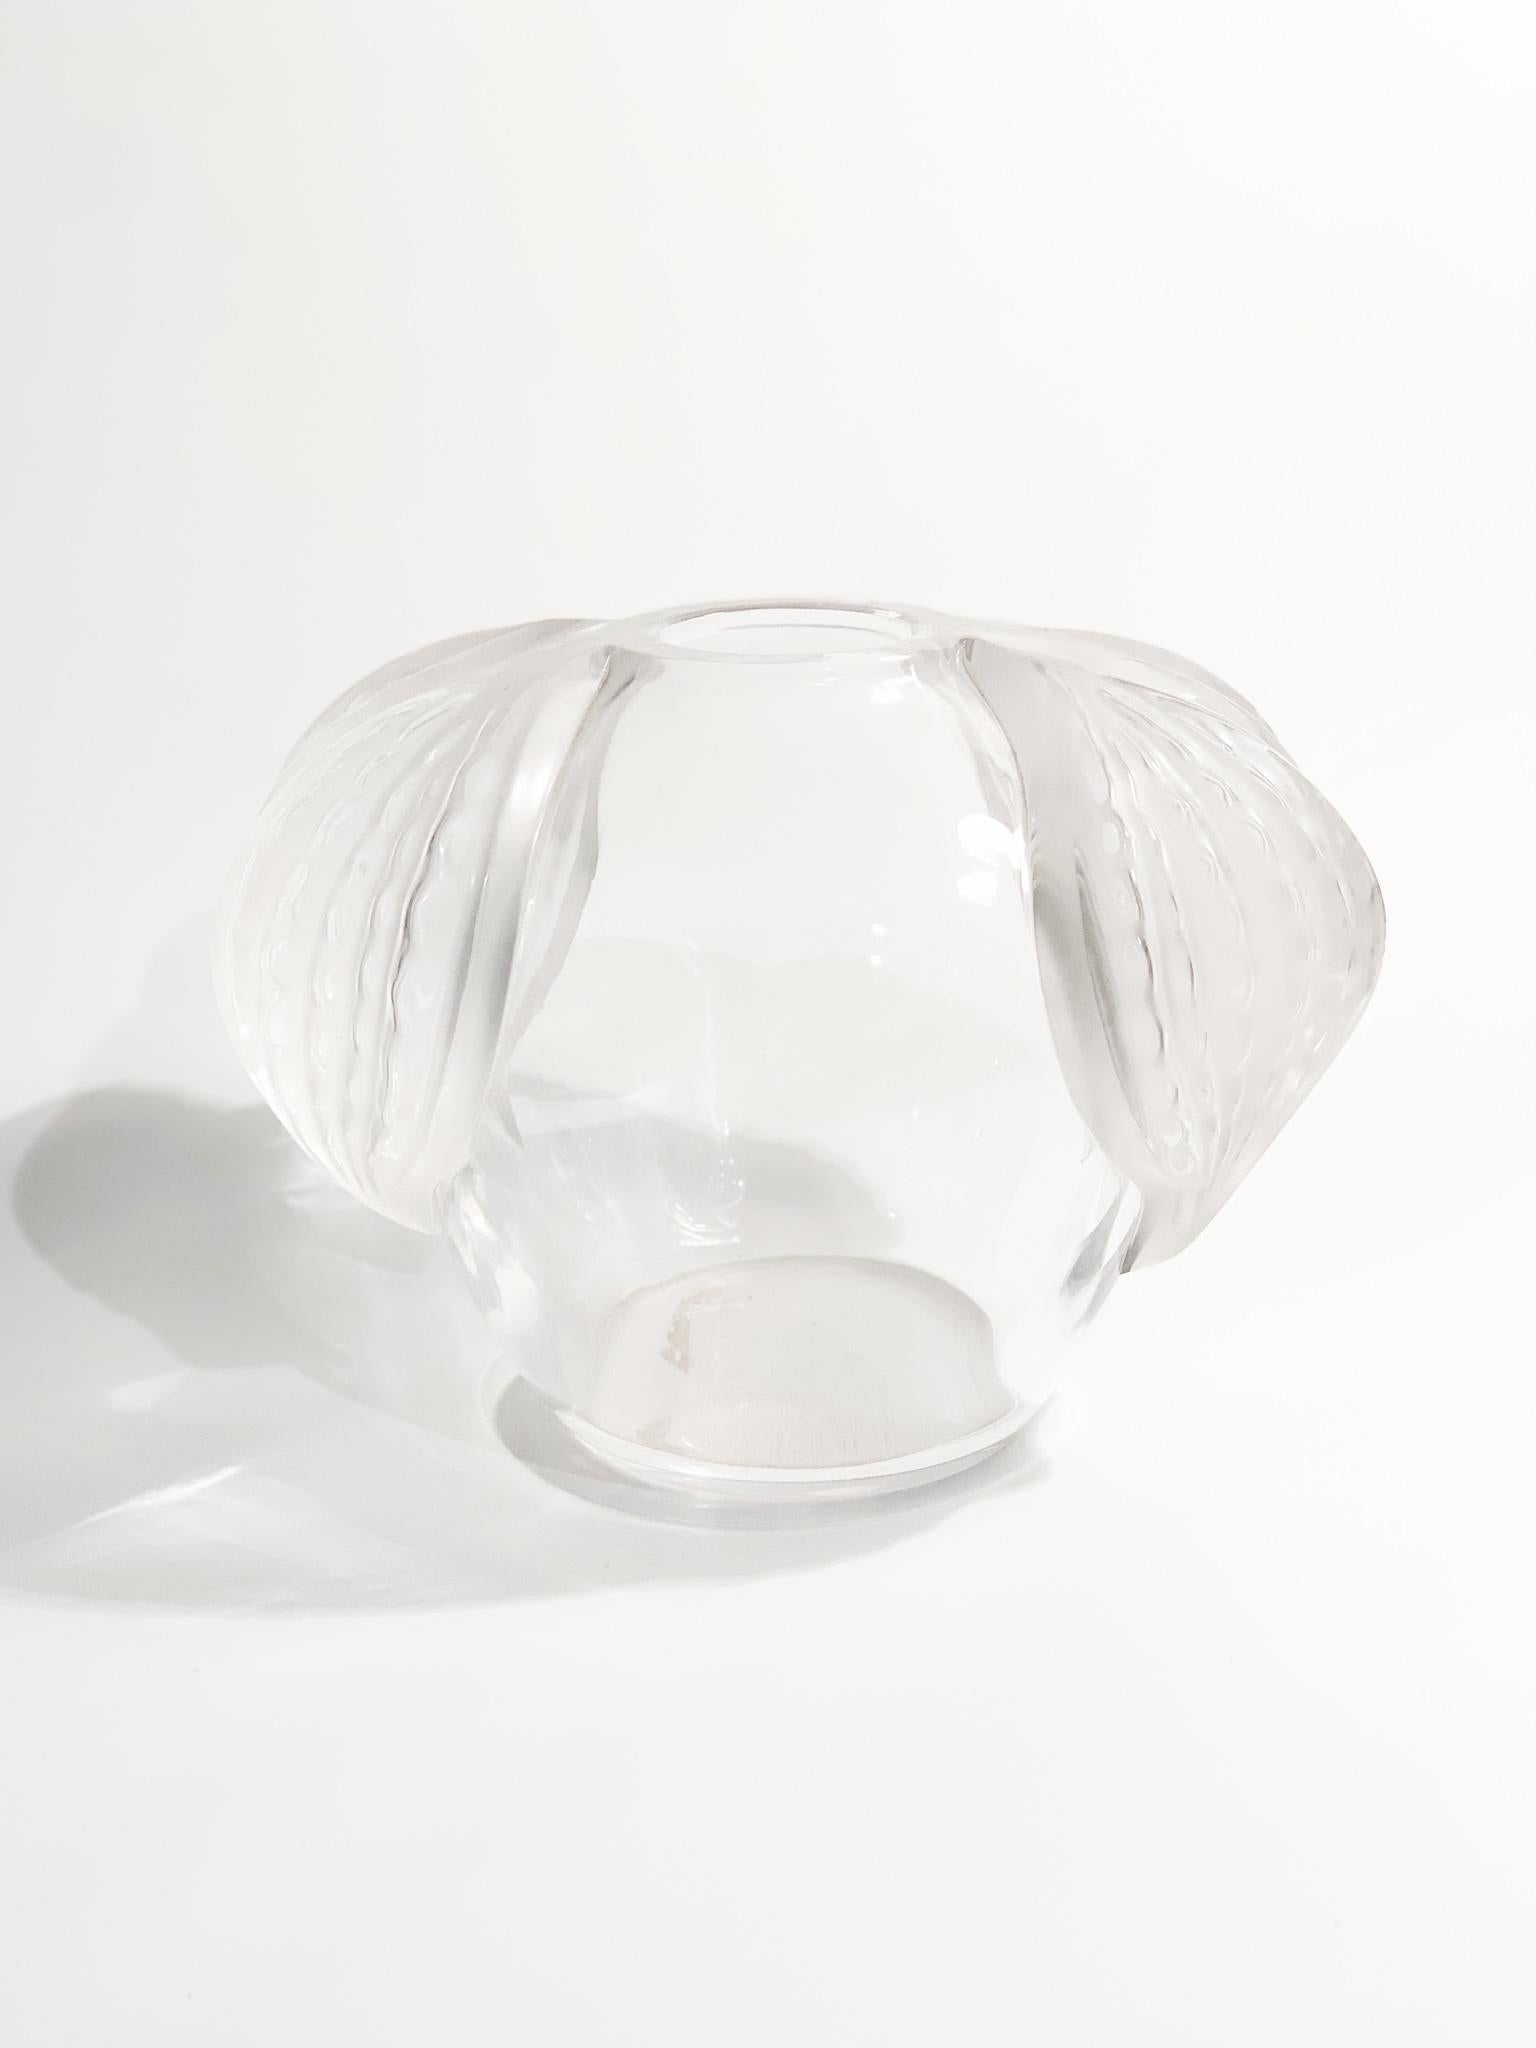 Rare Lalique Crystal Vase, San Diego Model, made in the 1940s

 Ø cm 22  Ø cm 16 h cm 16

I Lalique crystals  born from the idea of René Lalique, a French jeweler and glassmaker. 

During his career he collaborated with various important brands,